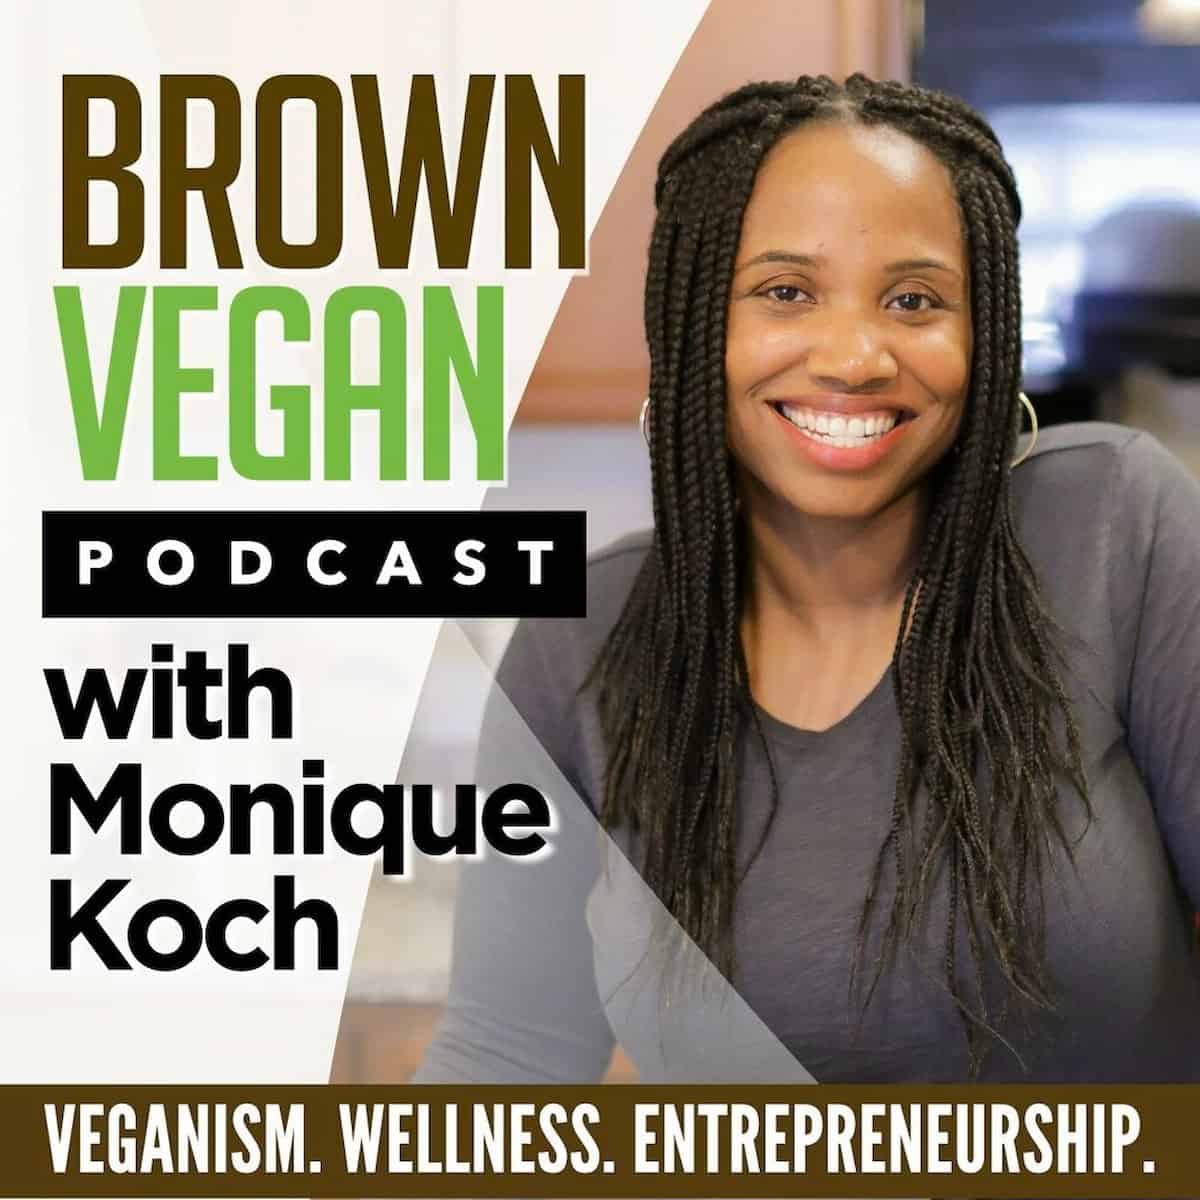 The Brown Vegan Podcast with Monique Koch cover art.